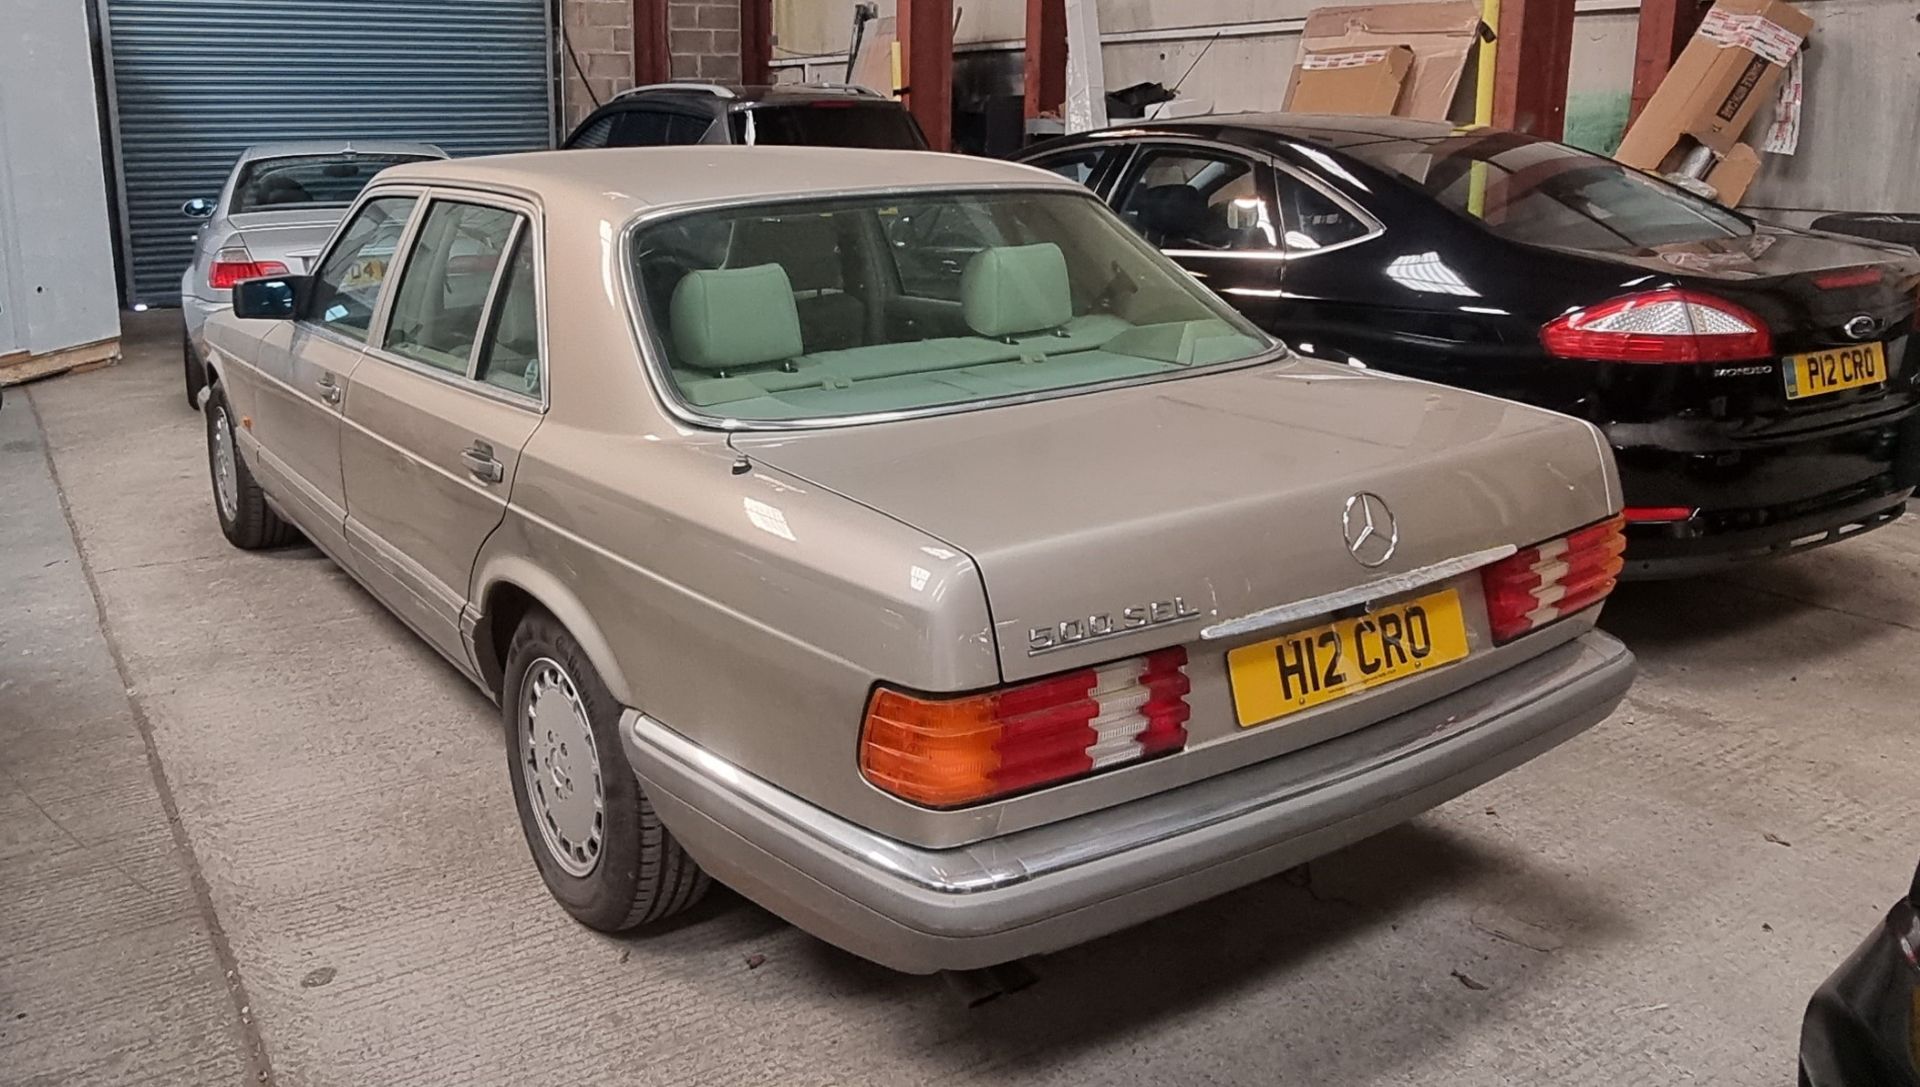 1991 Mercedes-Benz 500 SEL W126 Registration number H12 CRO Smoke silver with a beige leather - Image 4 of 35